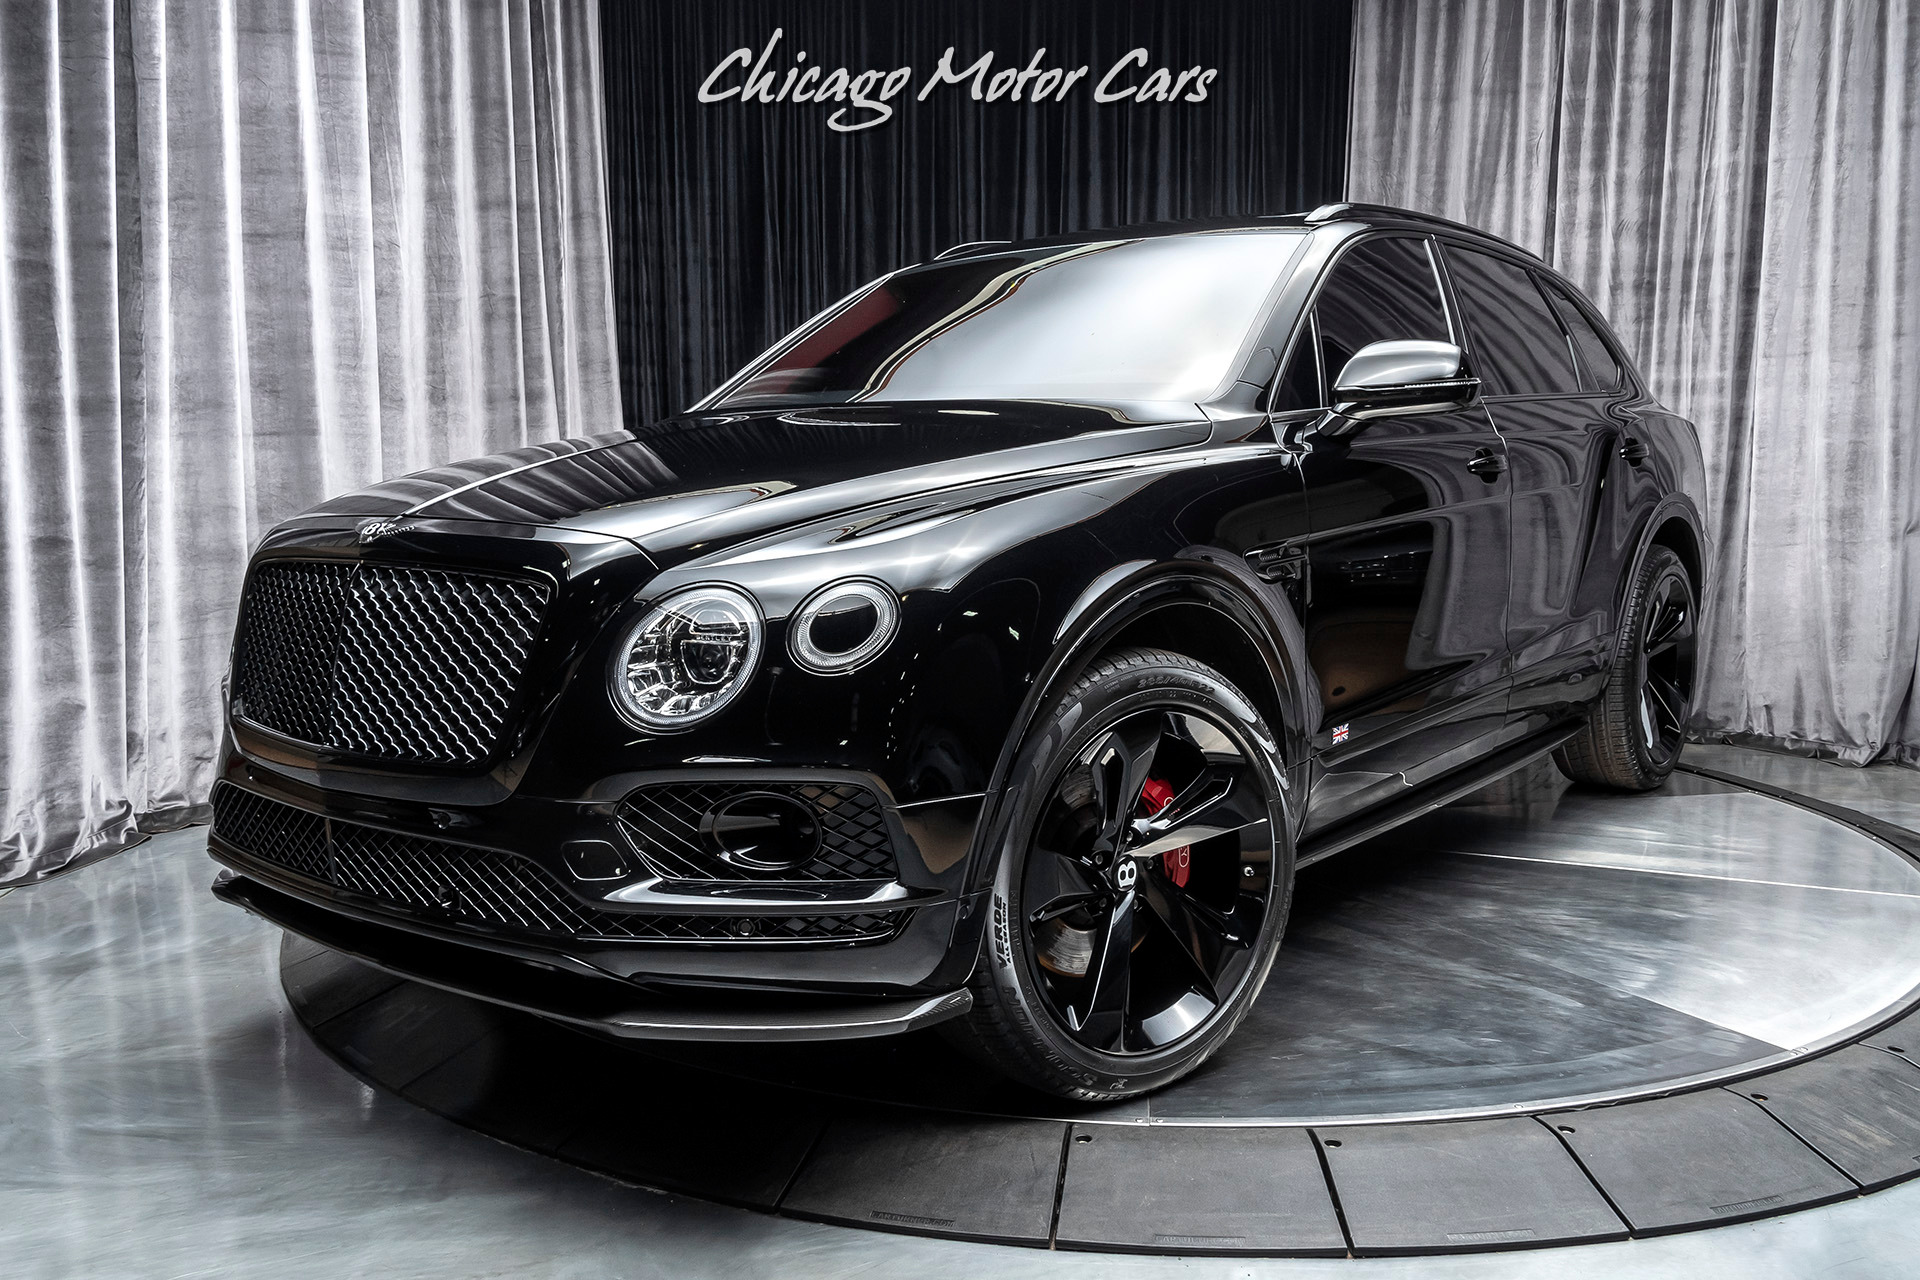 Used 2017 Bentley Bentayga W12 Mansory SUV LOADED WITH THOUSANDS IN  OPTIONS! MANSORY BODY KIT! For Sale (Special Pricing) | Chicago Motor Cars  Stock #17447